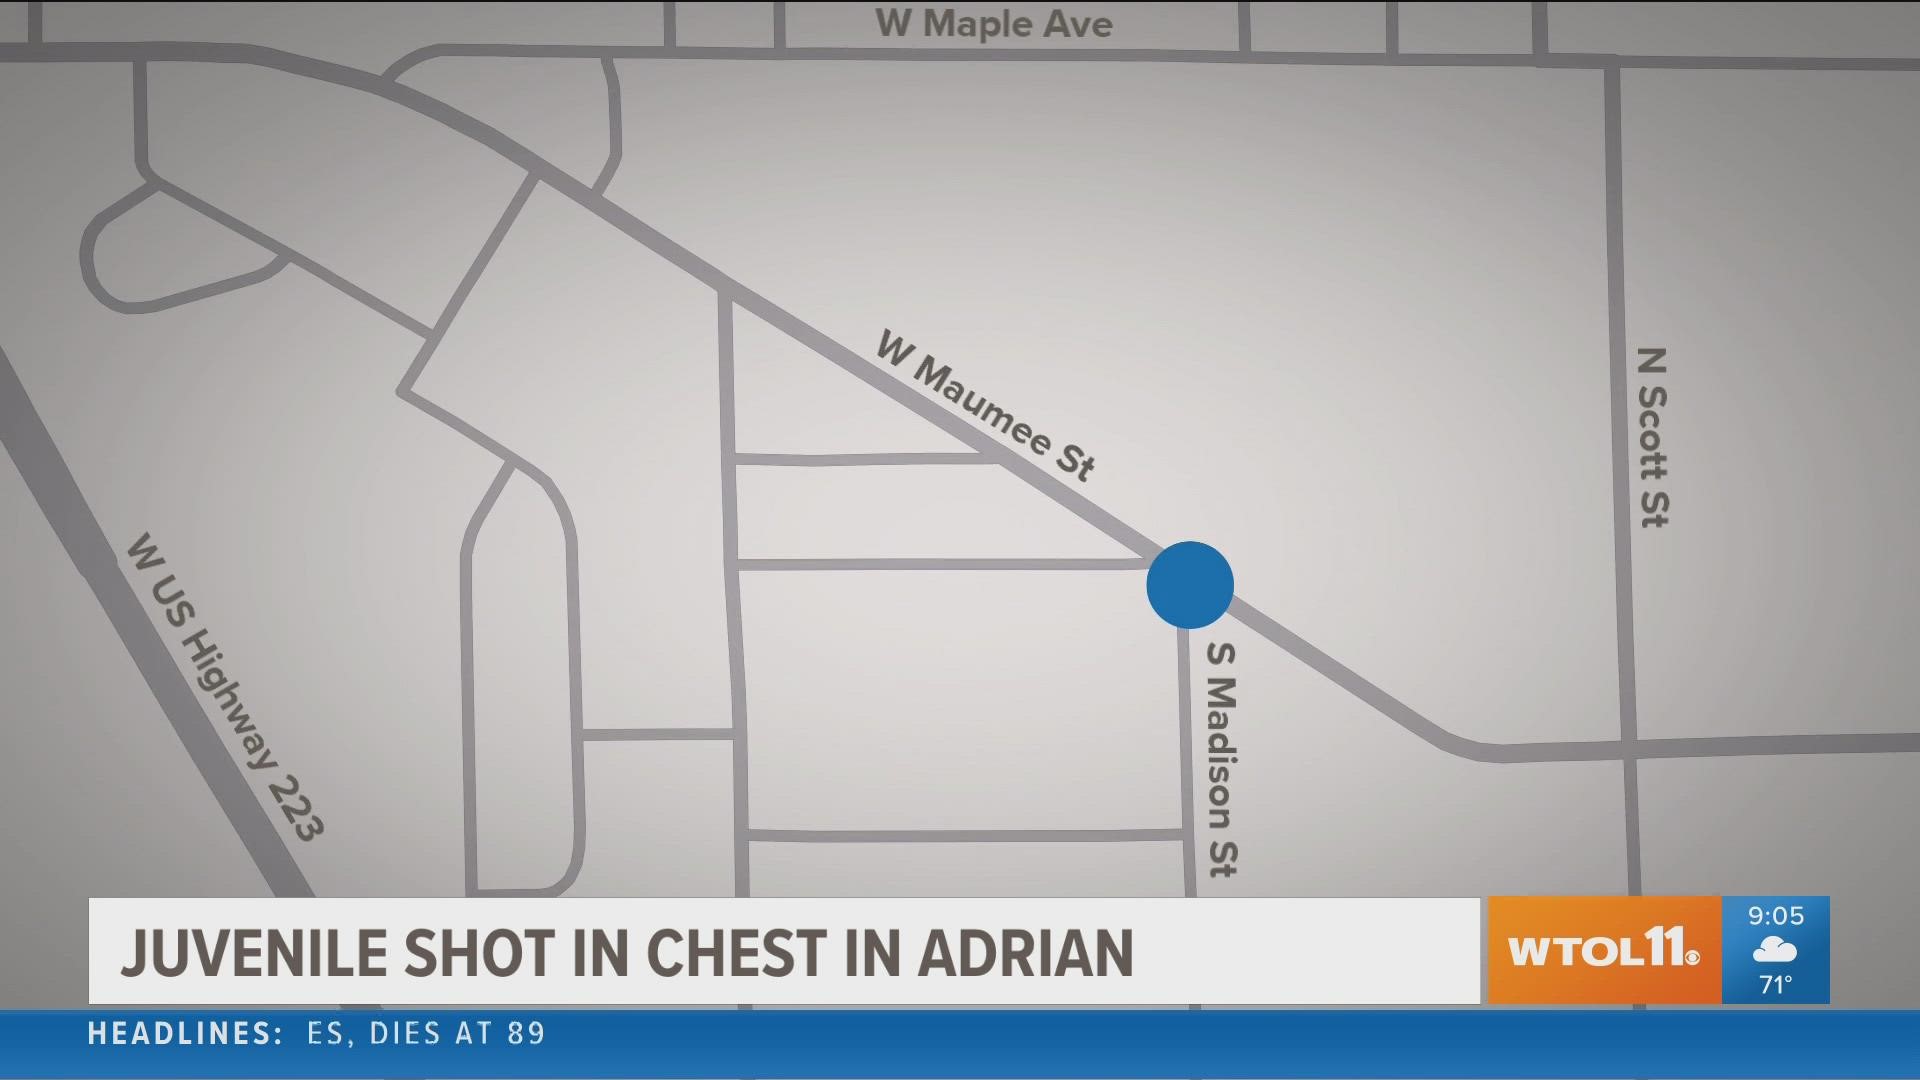 The shooting occurred after 4 a.m. on Sunday morning.